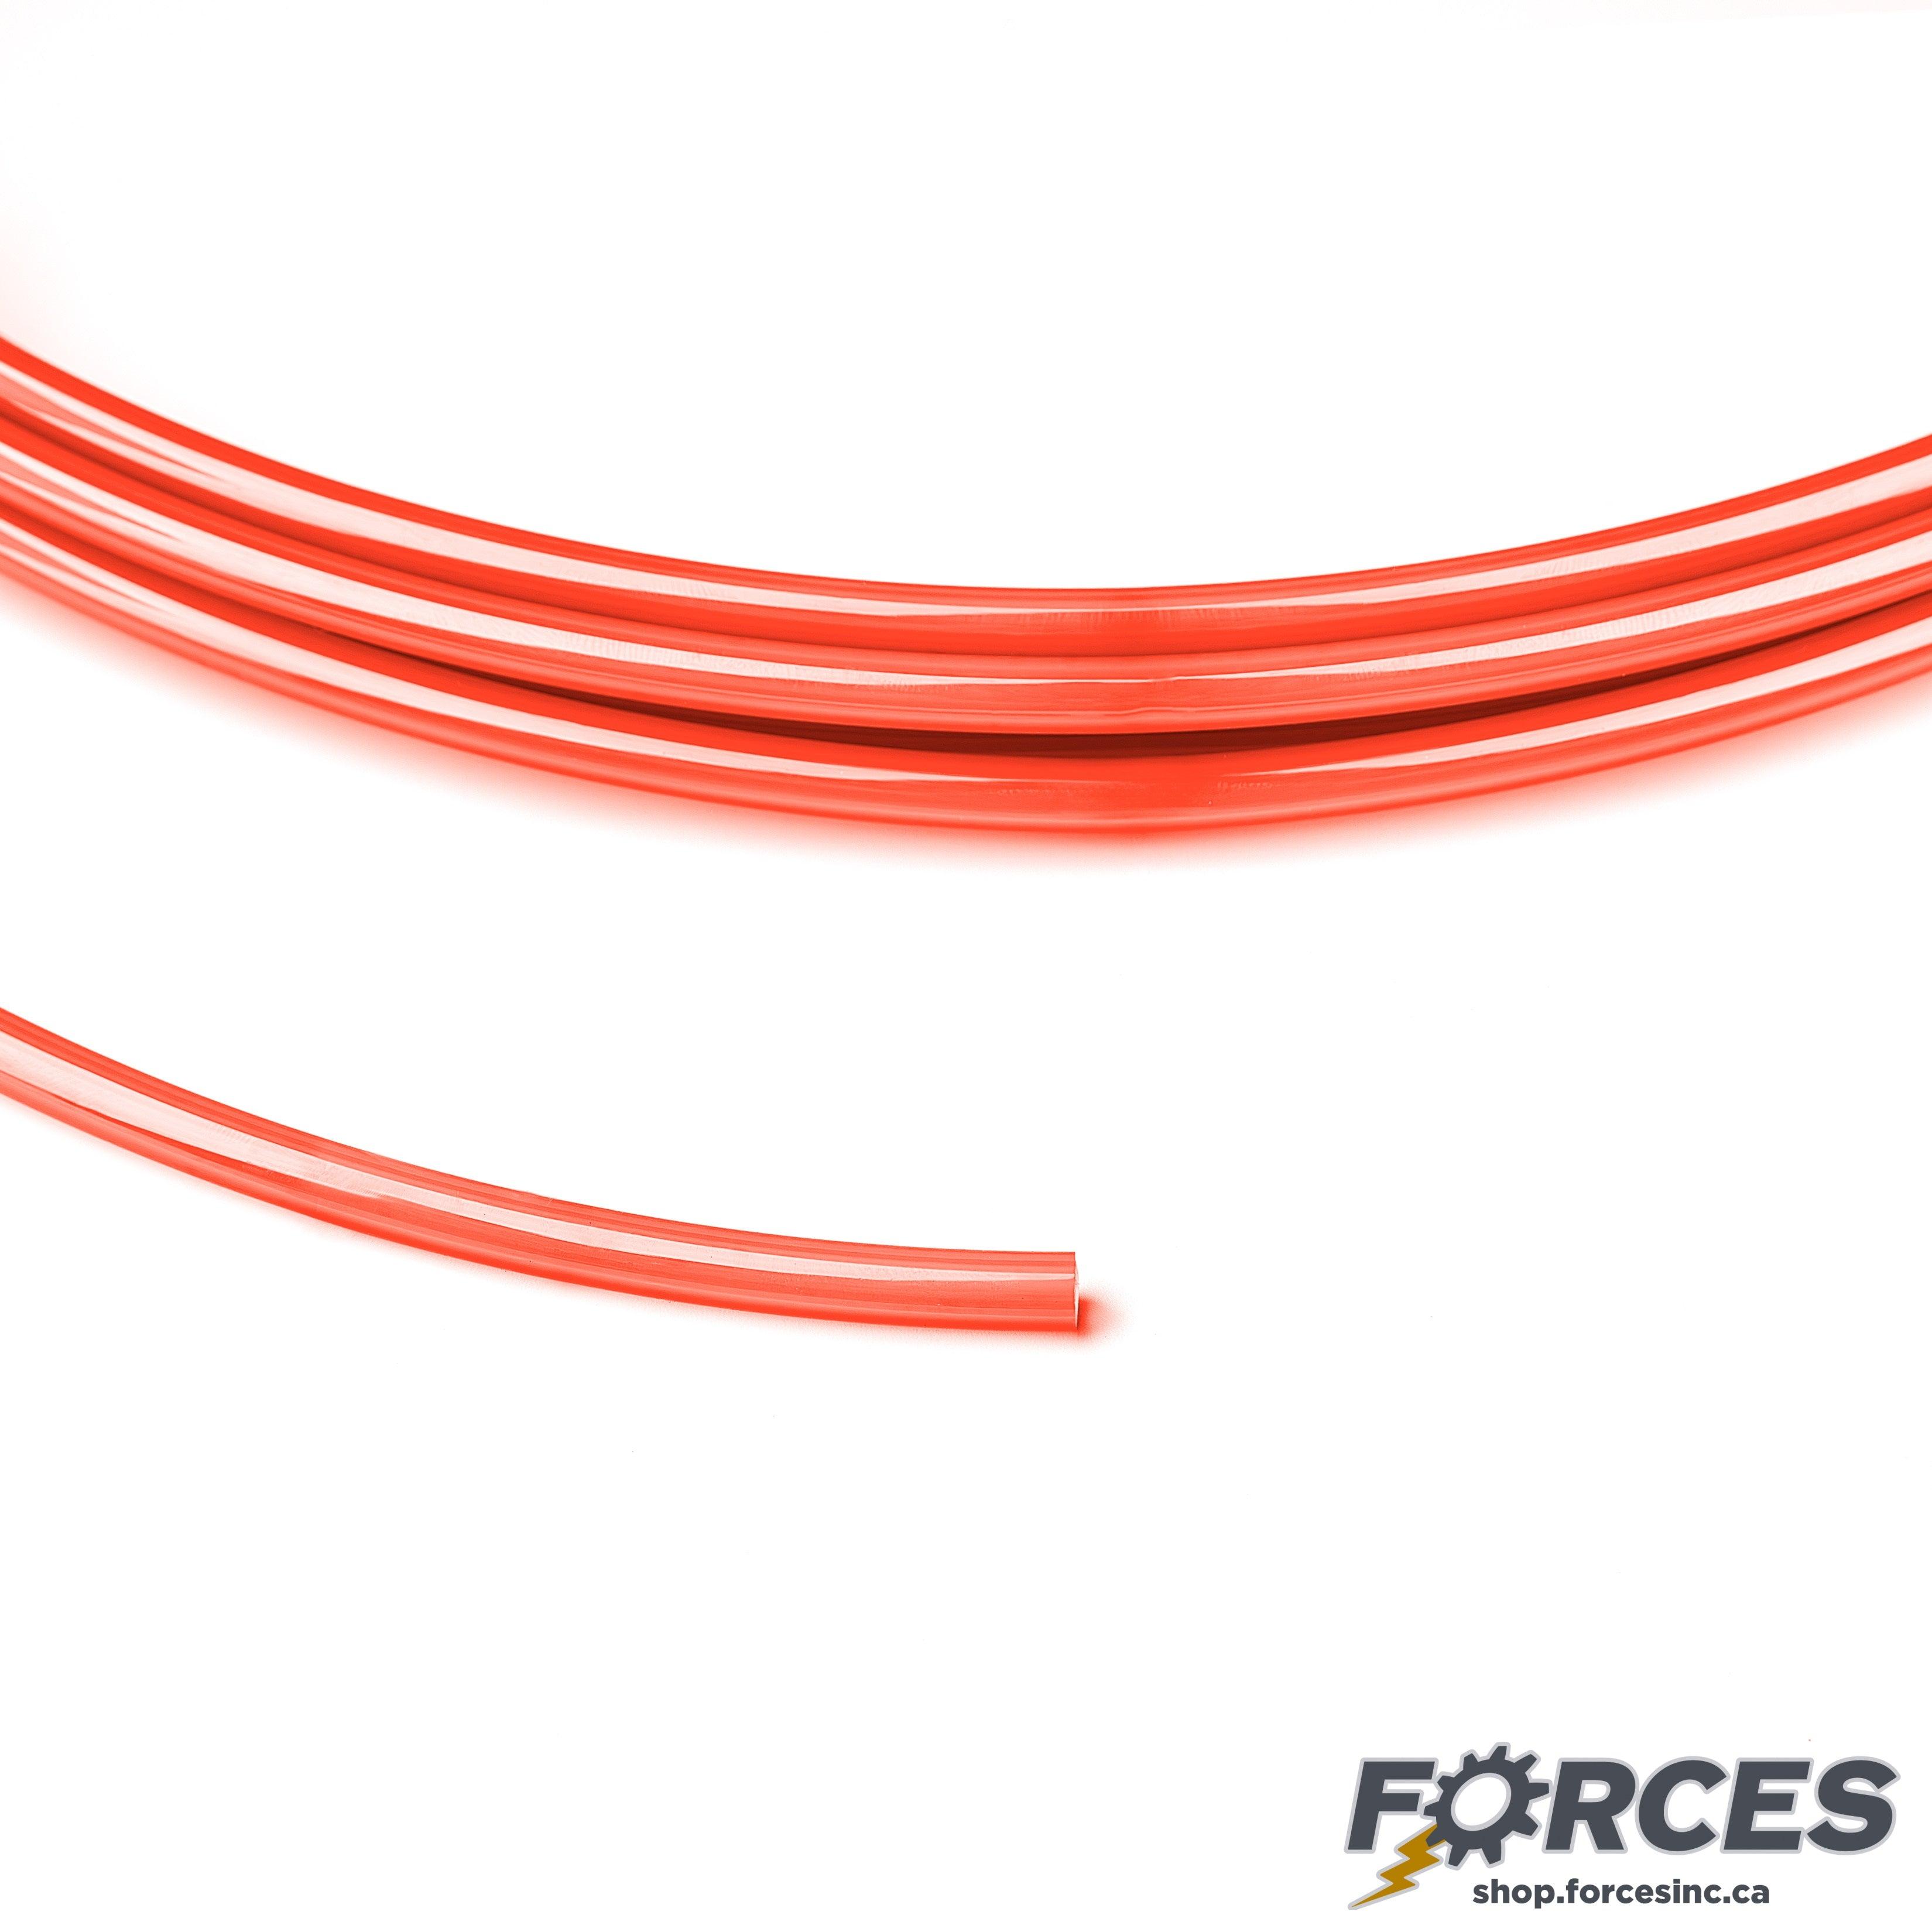 Pneumatic Air Tubing 3/8" x 6.4mm Red Polyurethane - 1ft - Forces Inc